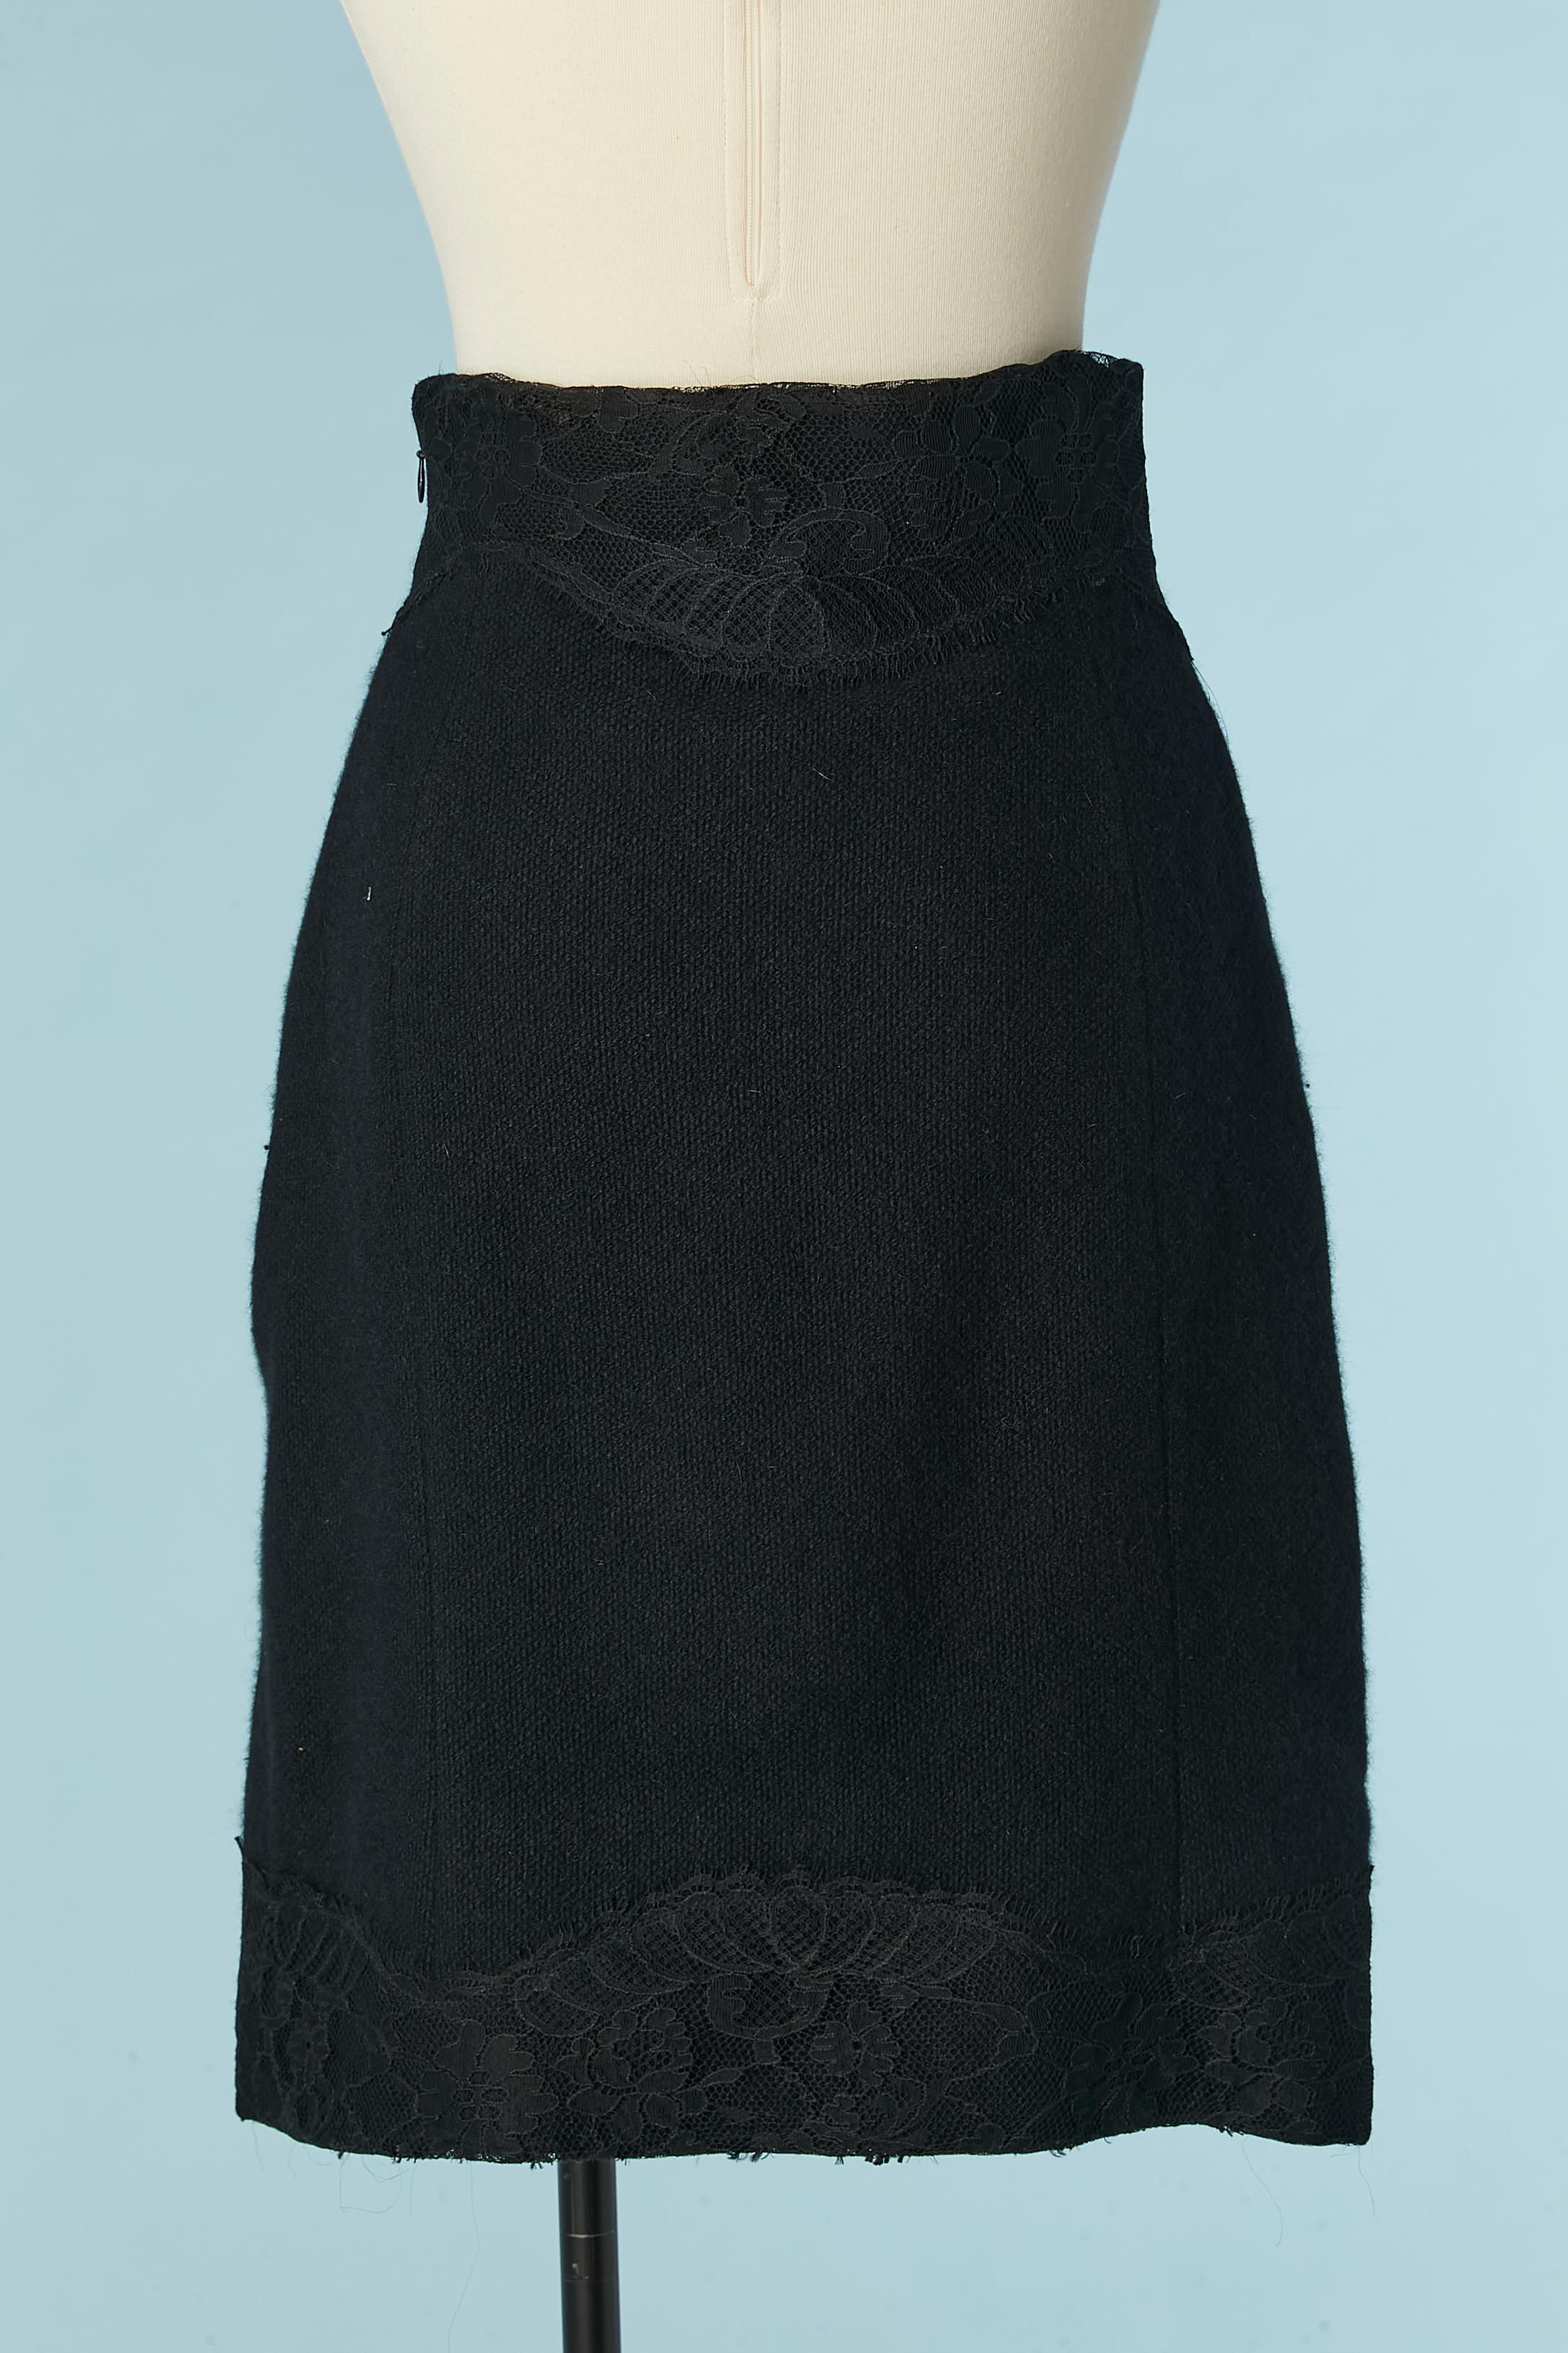 Black knit wool skirt with black lace edge on the top and bottom Rochas  For Sale 1